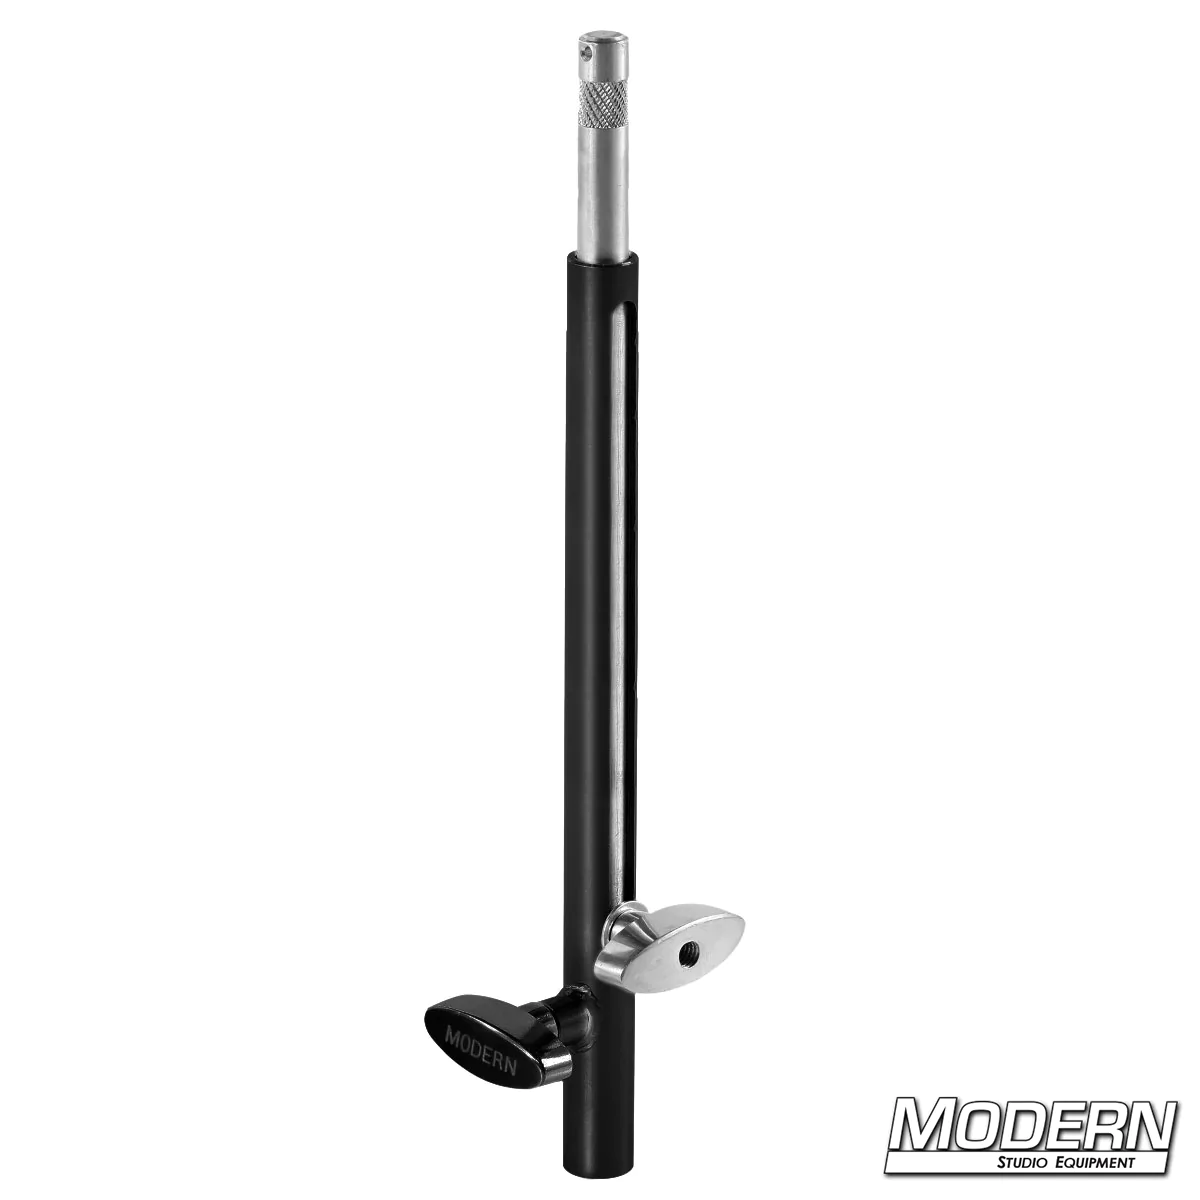 Telescoping Baby Stand Extension (14-1/2-inch to 23-inch) - Black Zinc